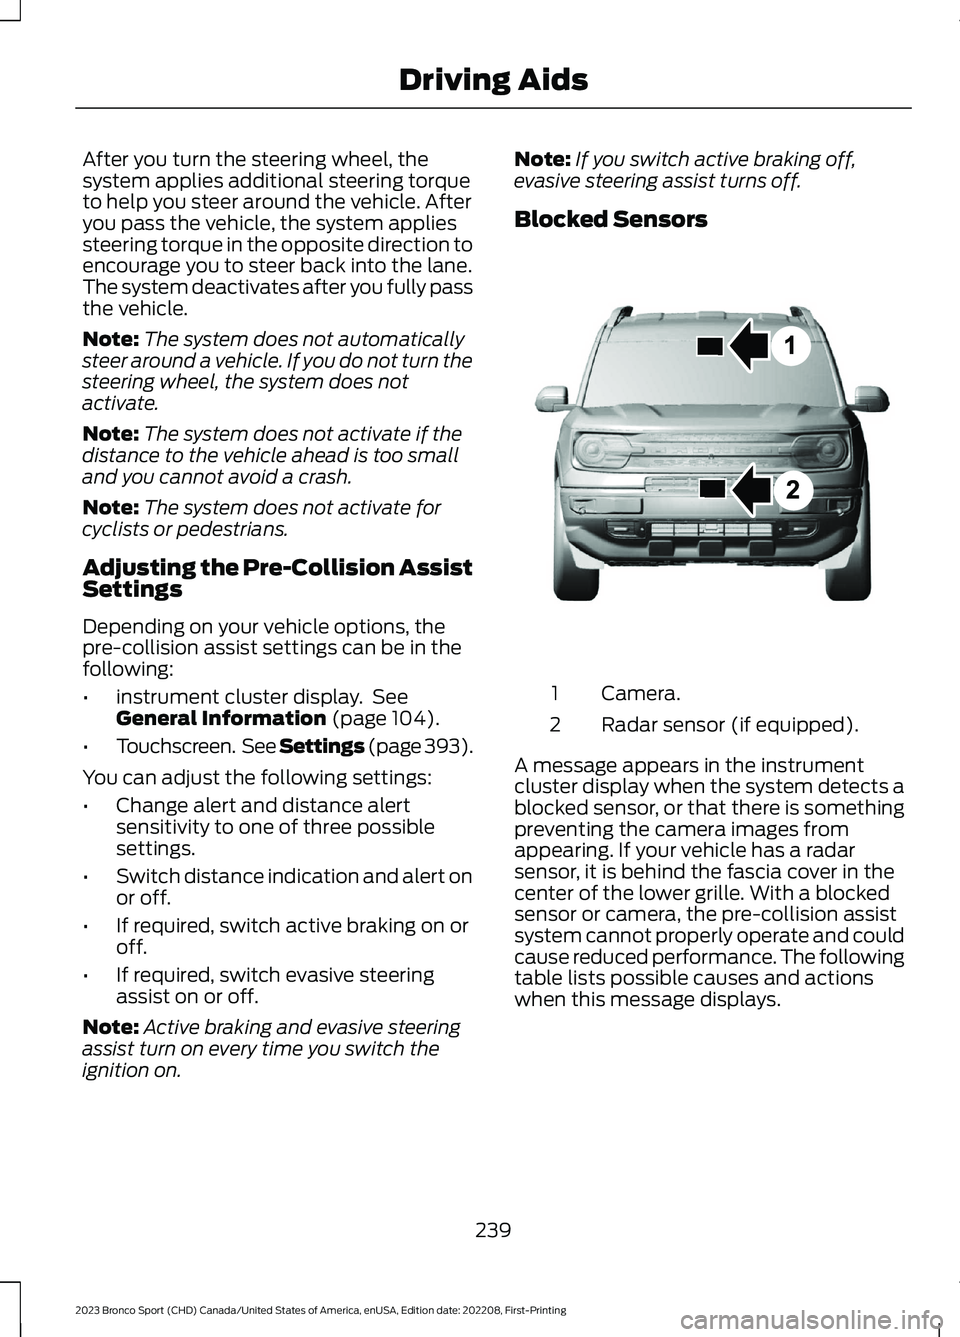 FORD BRONCO SPORT 2023  Owners Manual After you turn the steering wheel, thesystem applies additional steering torqueto help you steer around the vehicle. Afteryou pass the vehicle, the system appliessteering torque in the opposite direct